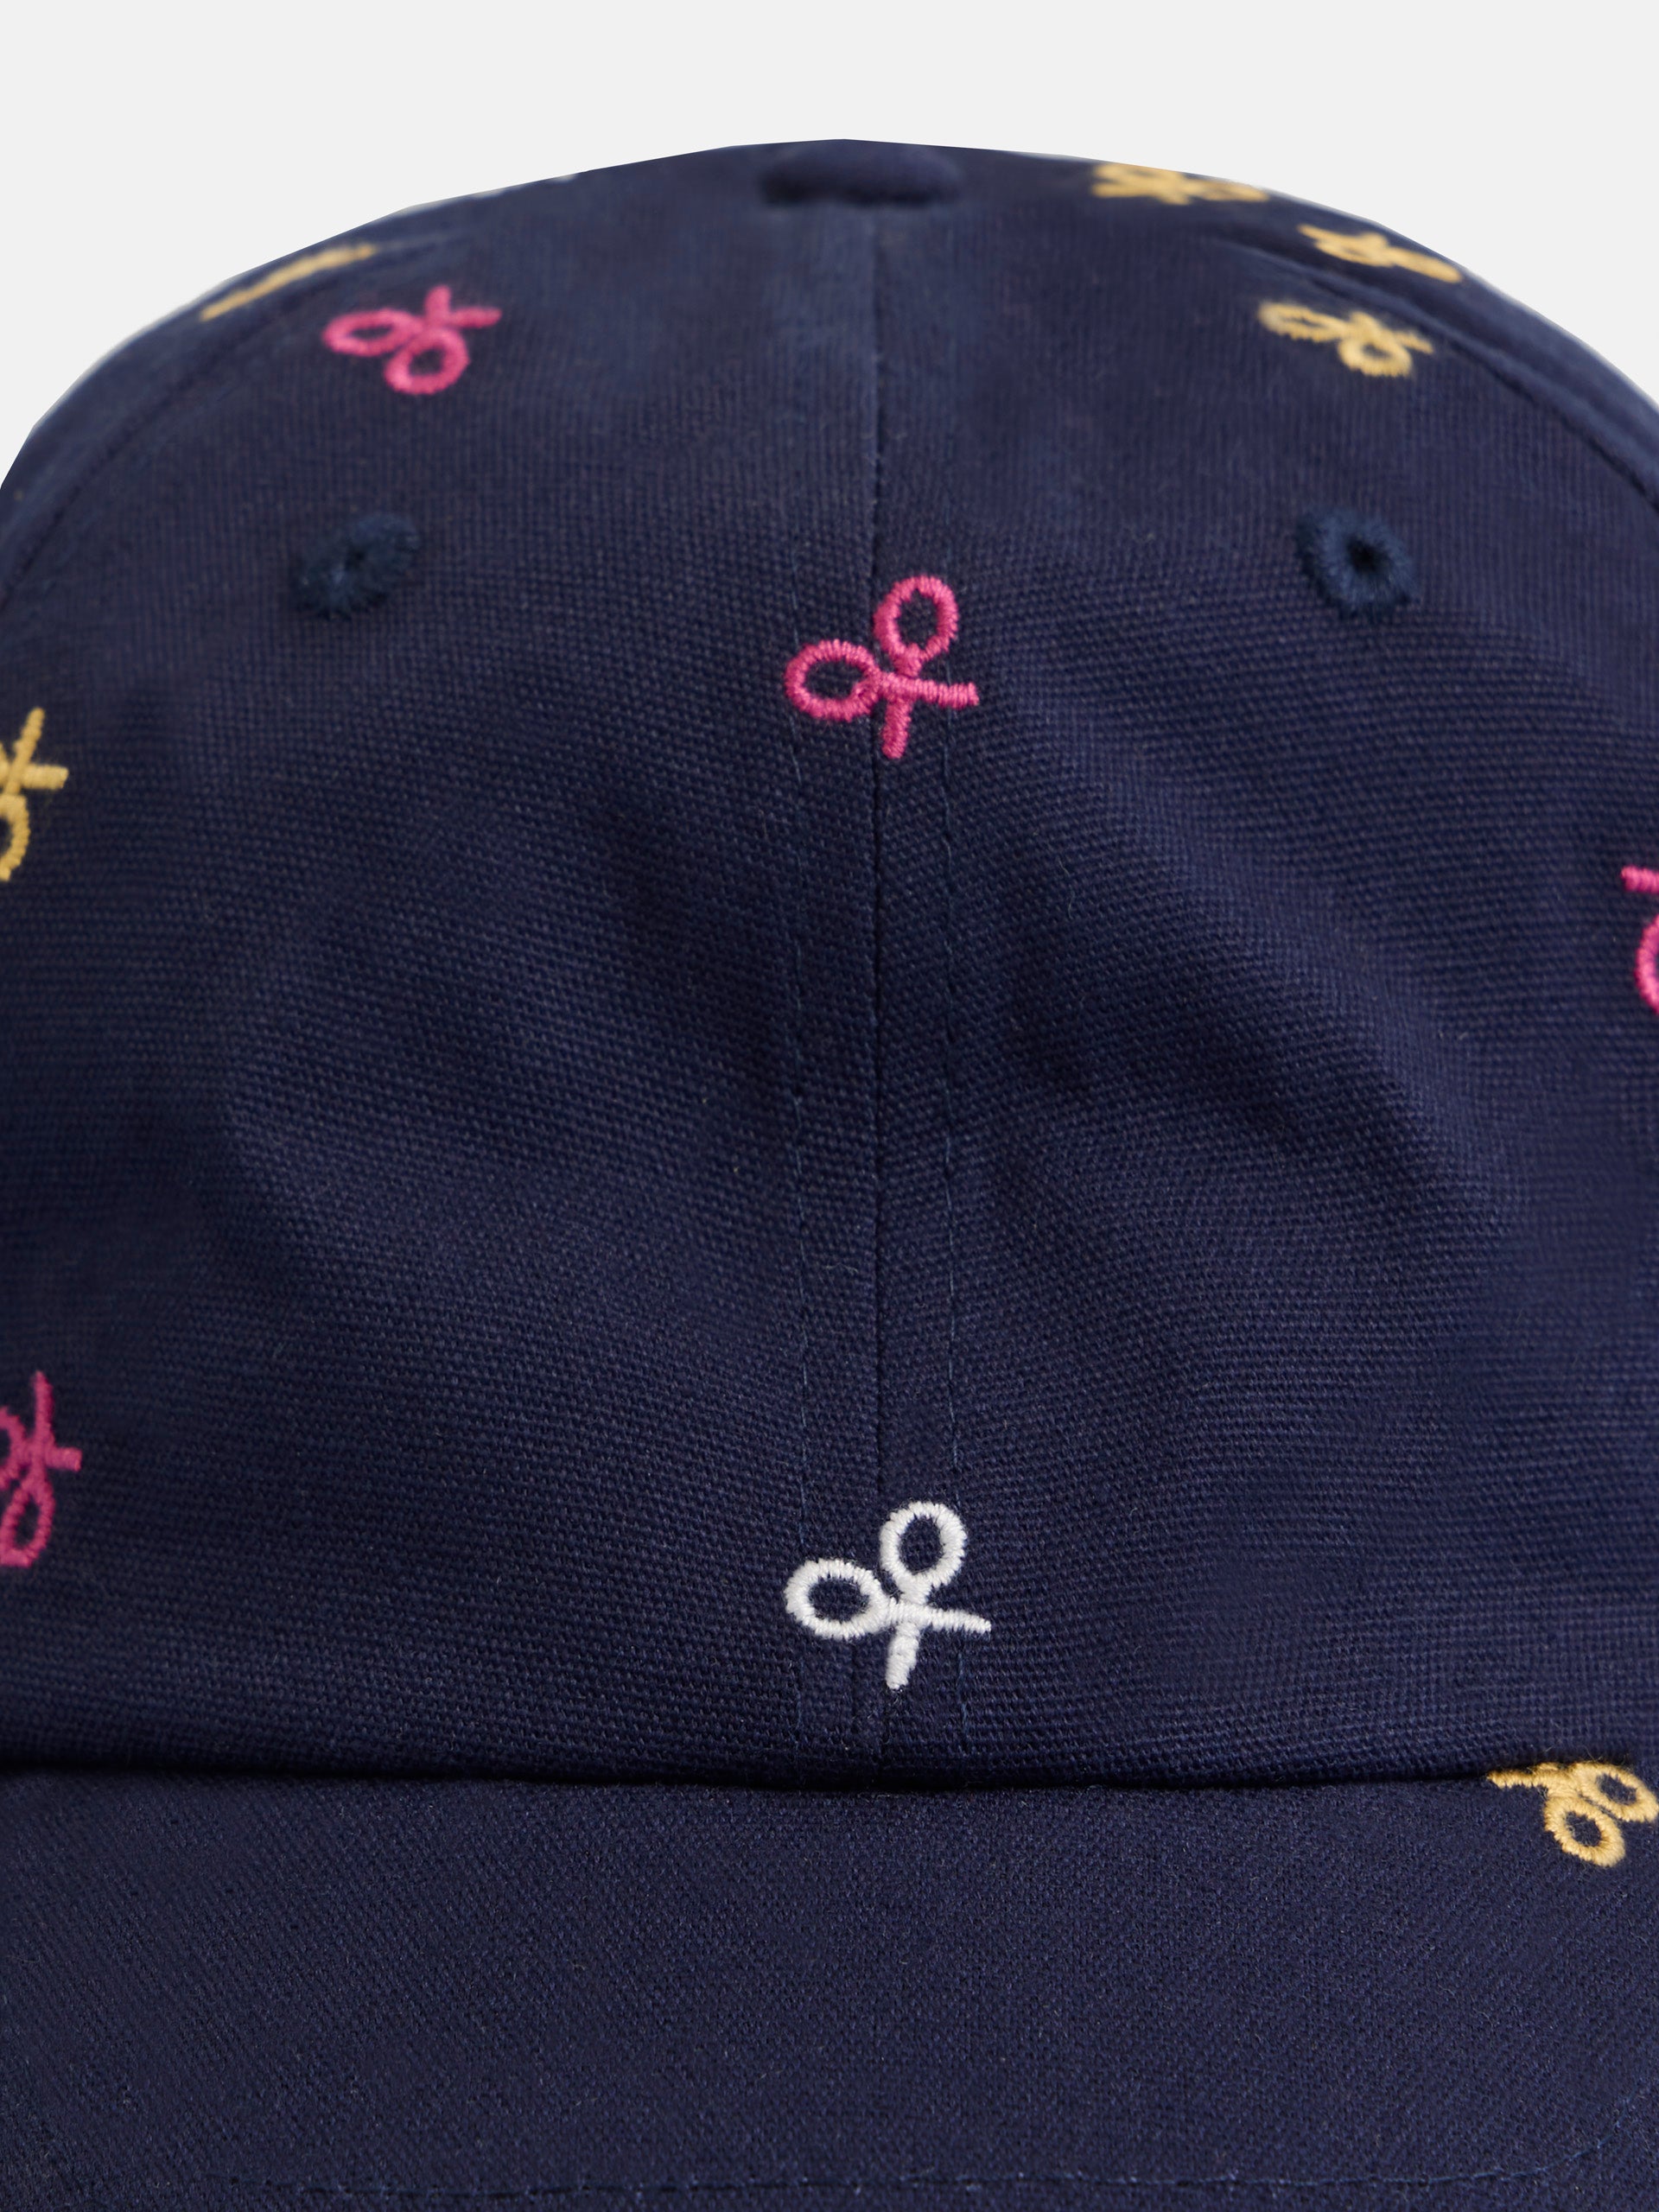 Navy blue embroidered rackets cap